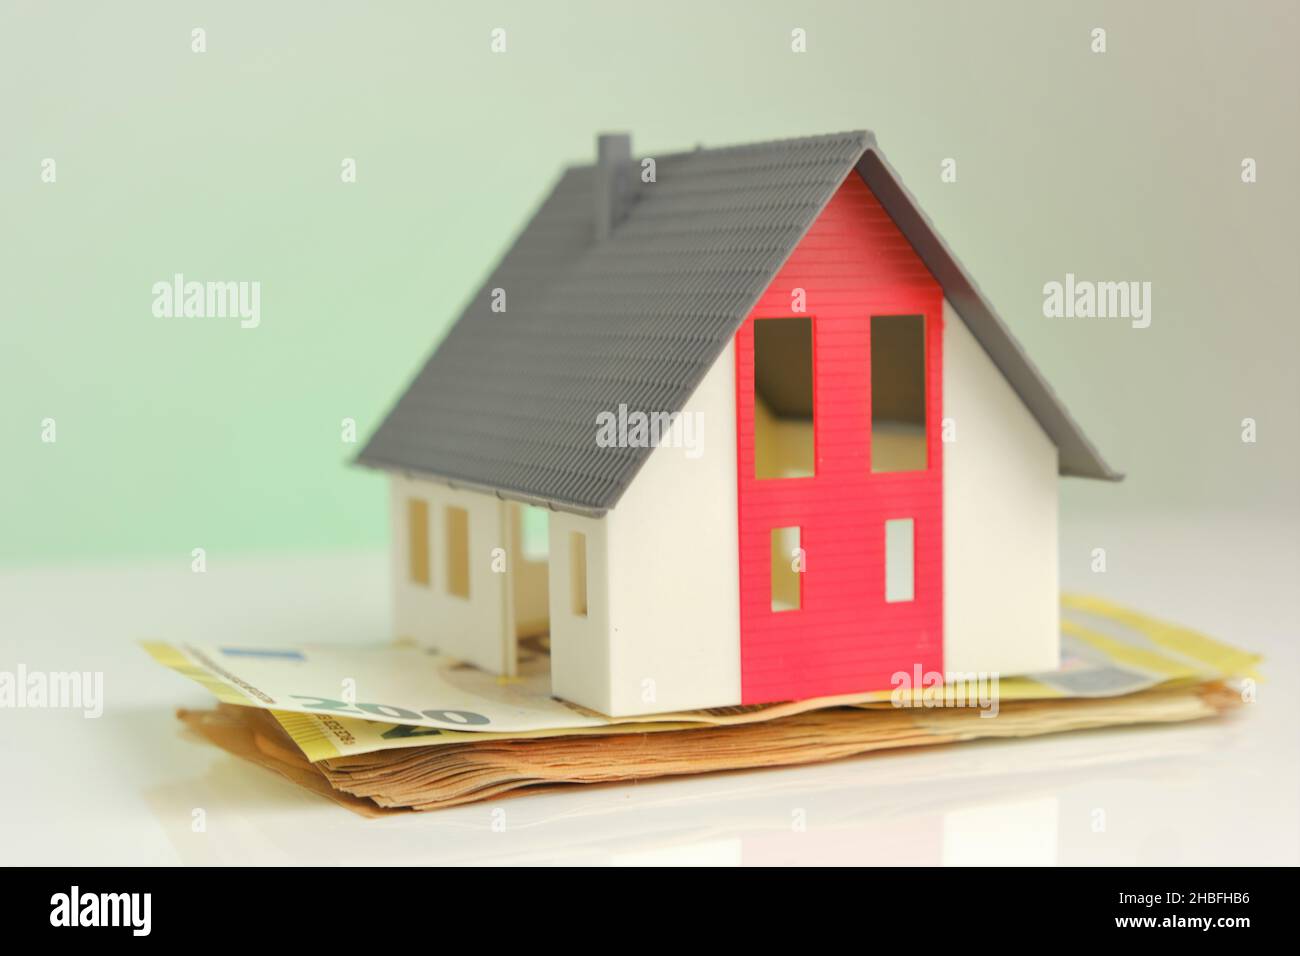 Mock house with roof on euro banknotes background. Real estate market. Real estate loan. Stock Photo